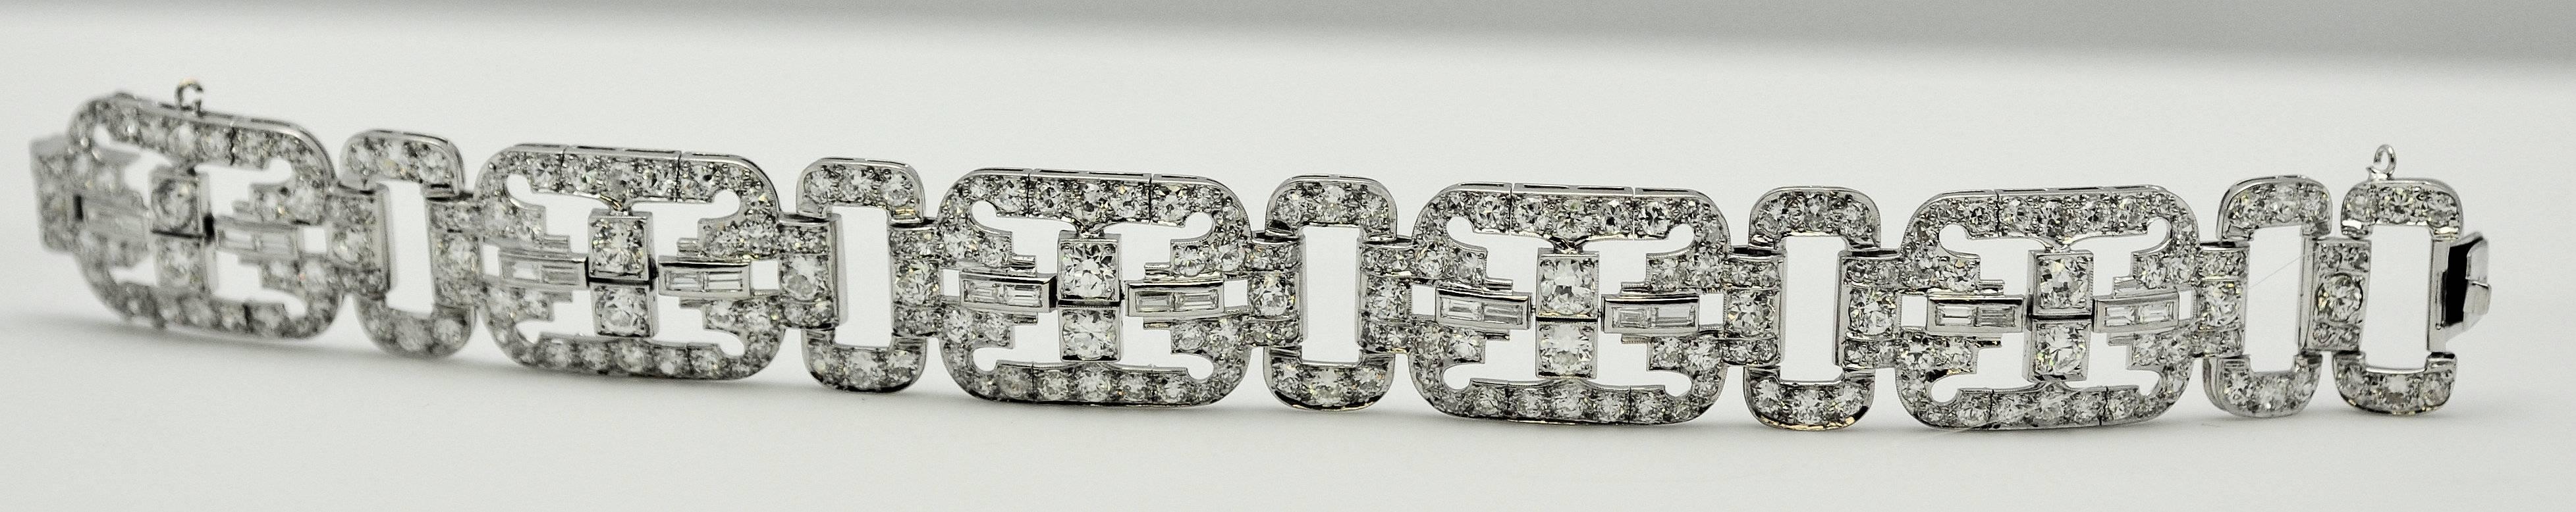 Beautiful wide Art Deco platinum and diamond bracelet with with 237 round diamonds and 20 baguette cut diamonds for a total weight of 13.50 ct. total weight VS/SI, G-H-I.  Metal not marked, but tested. Excellent workmanship, note the photo of the